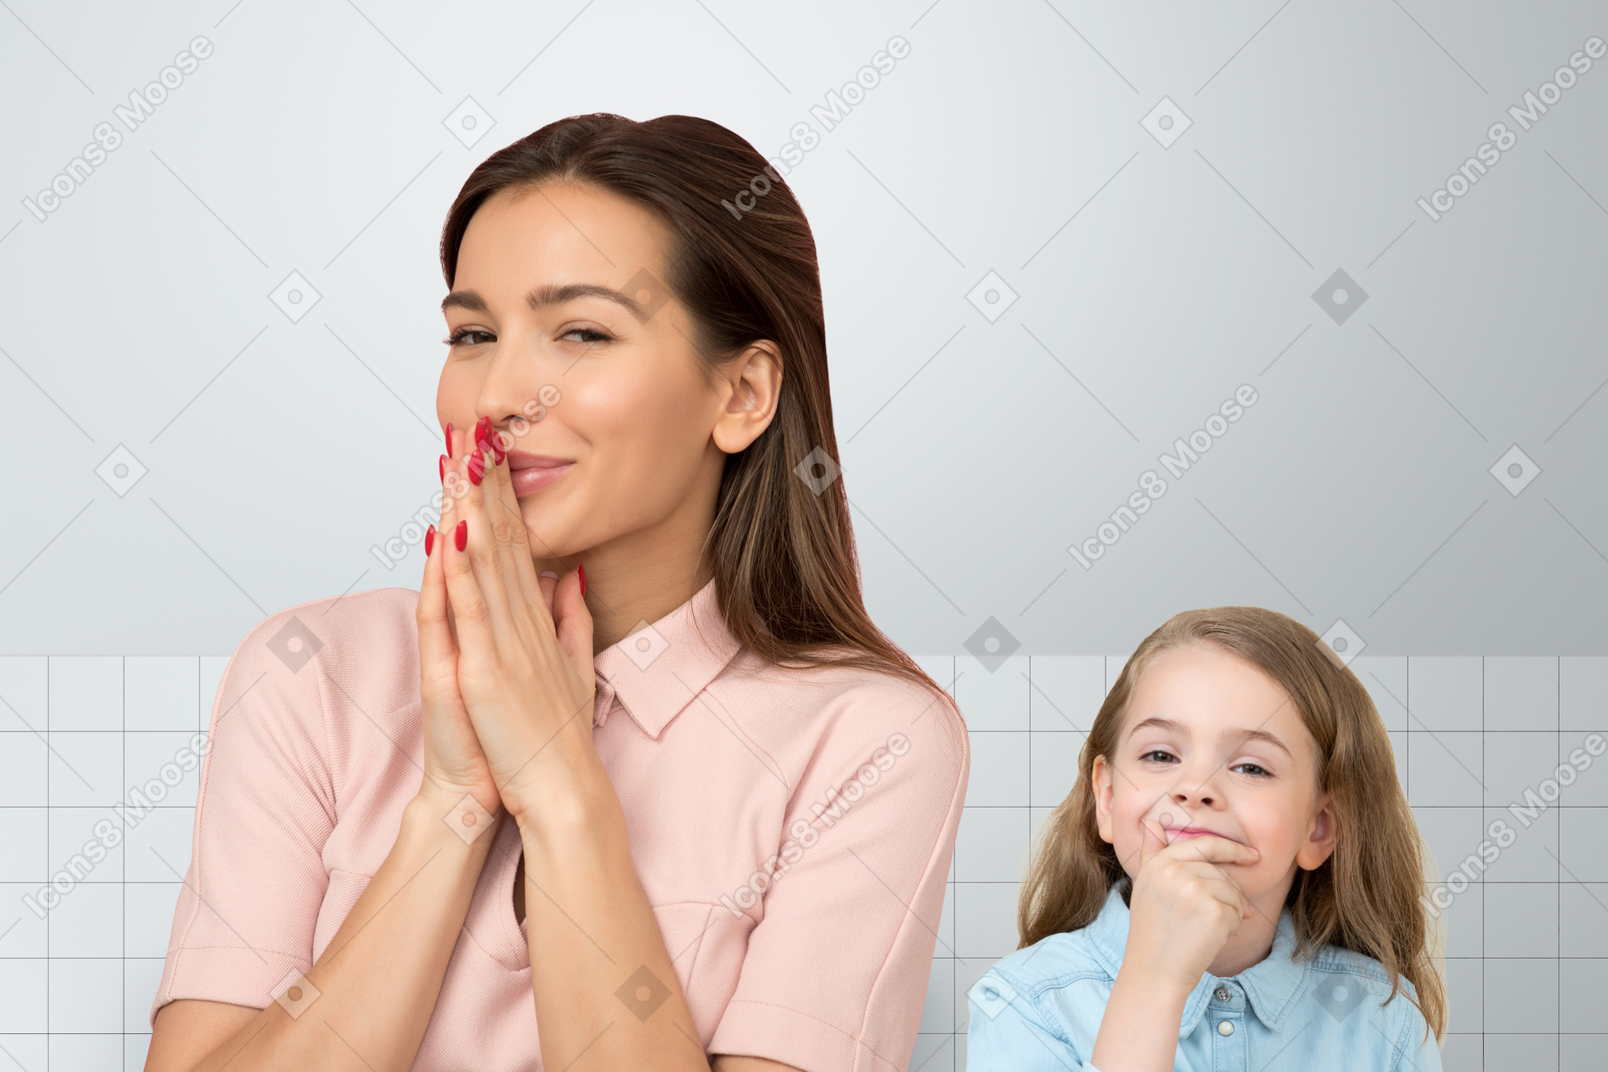 A woman standing next to a little girl who is holding hand on a chin